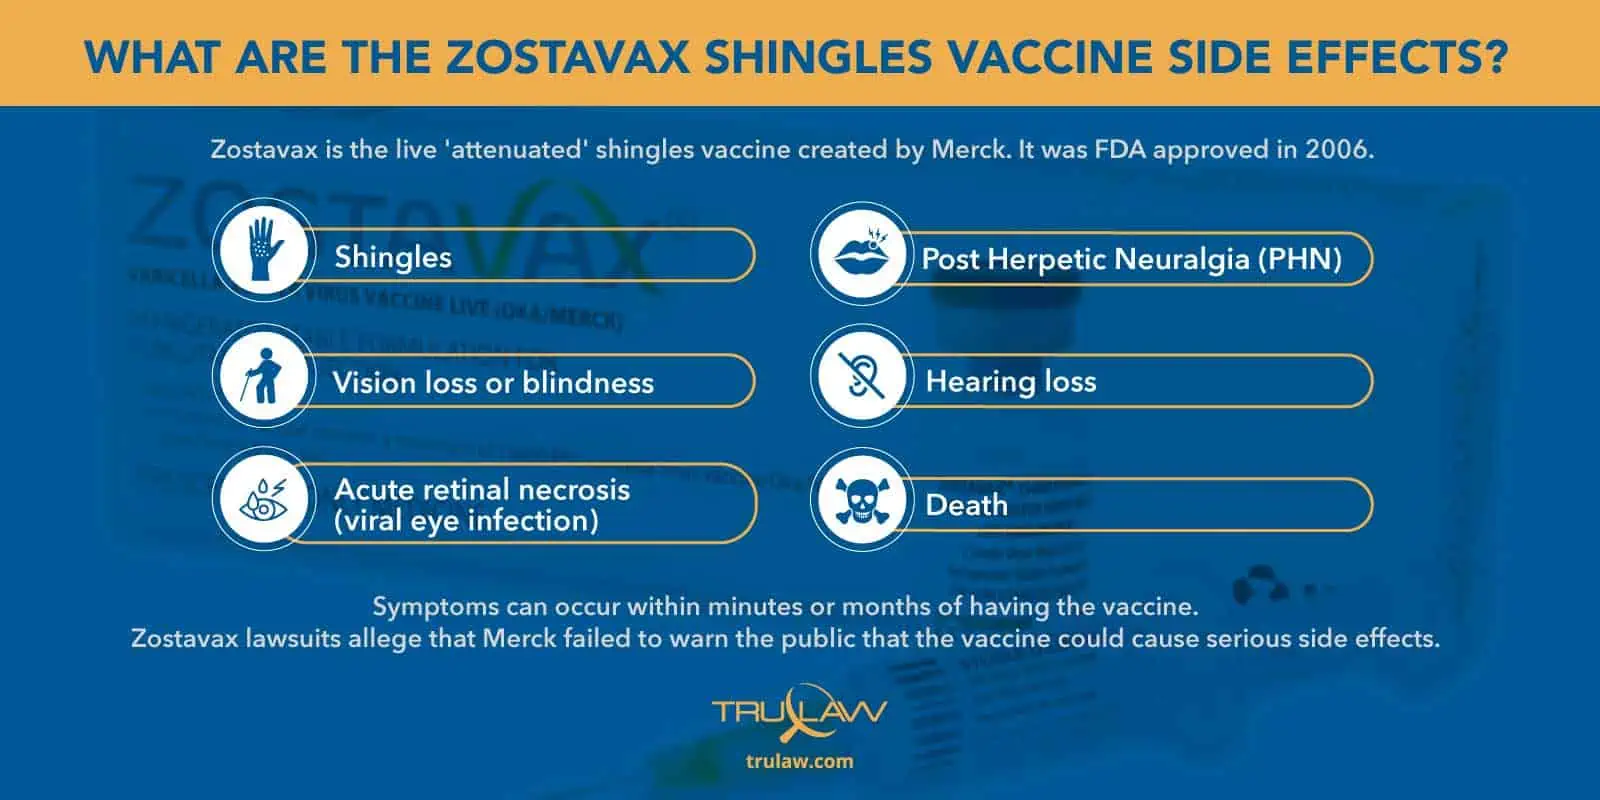 Zostavax-shingles-vaccine-side-effects-lawsuit-infographic